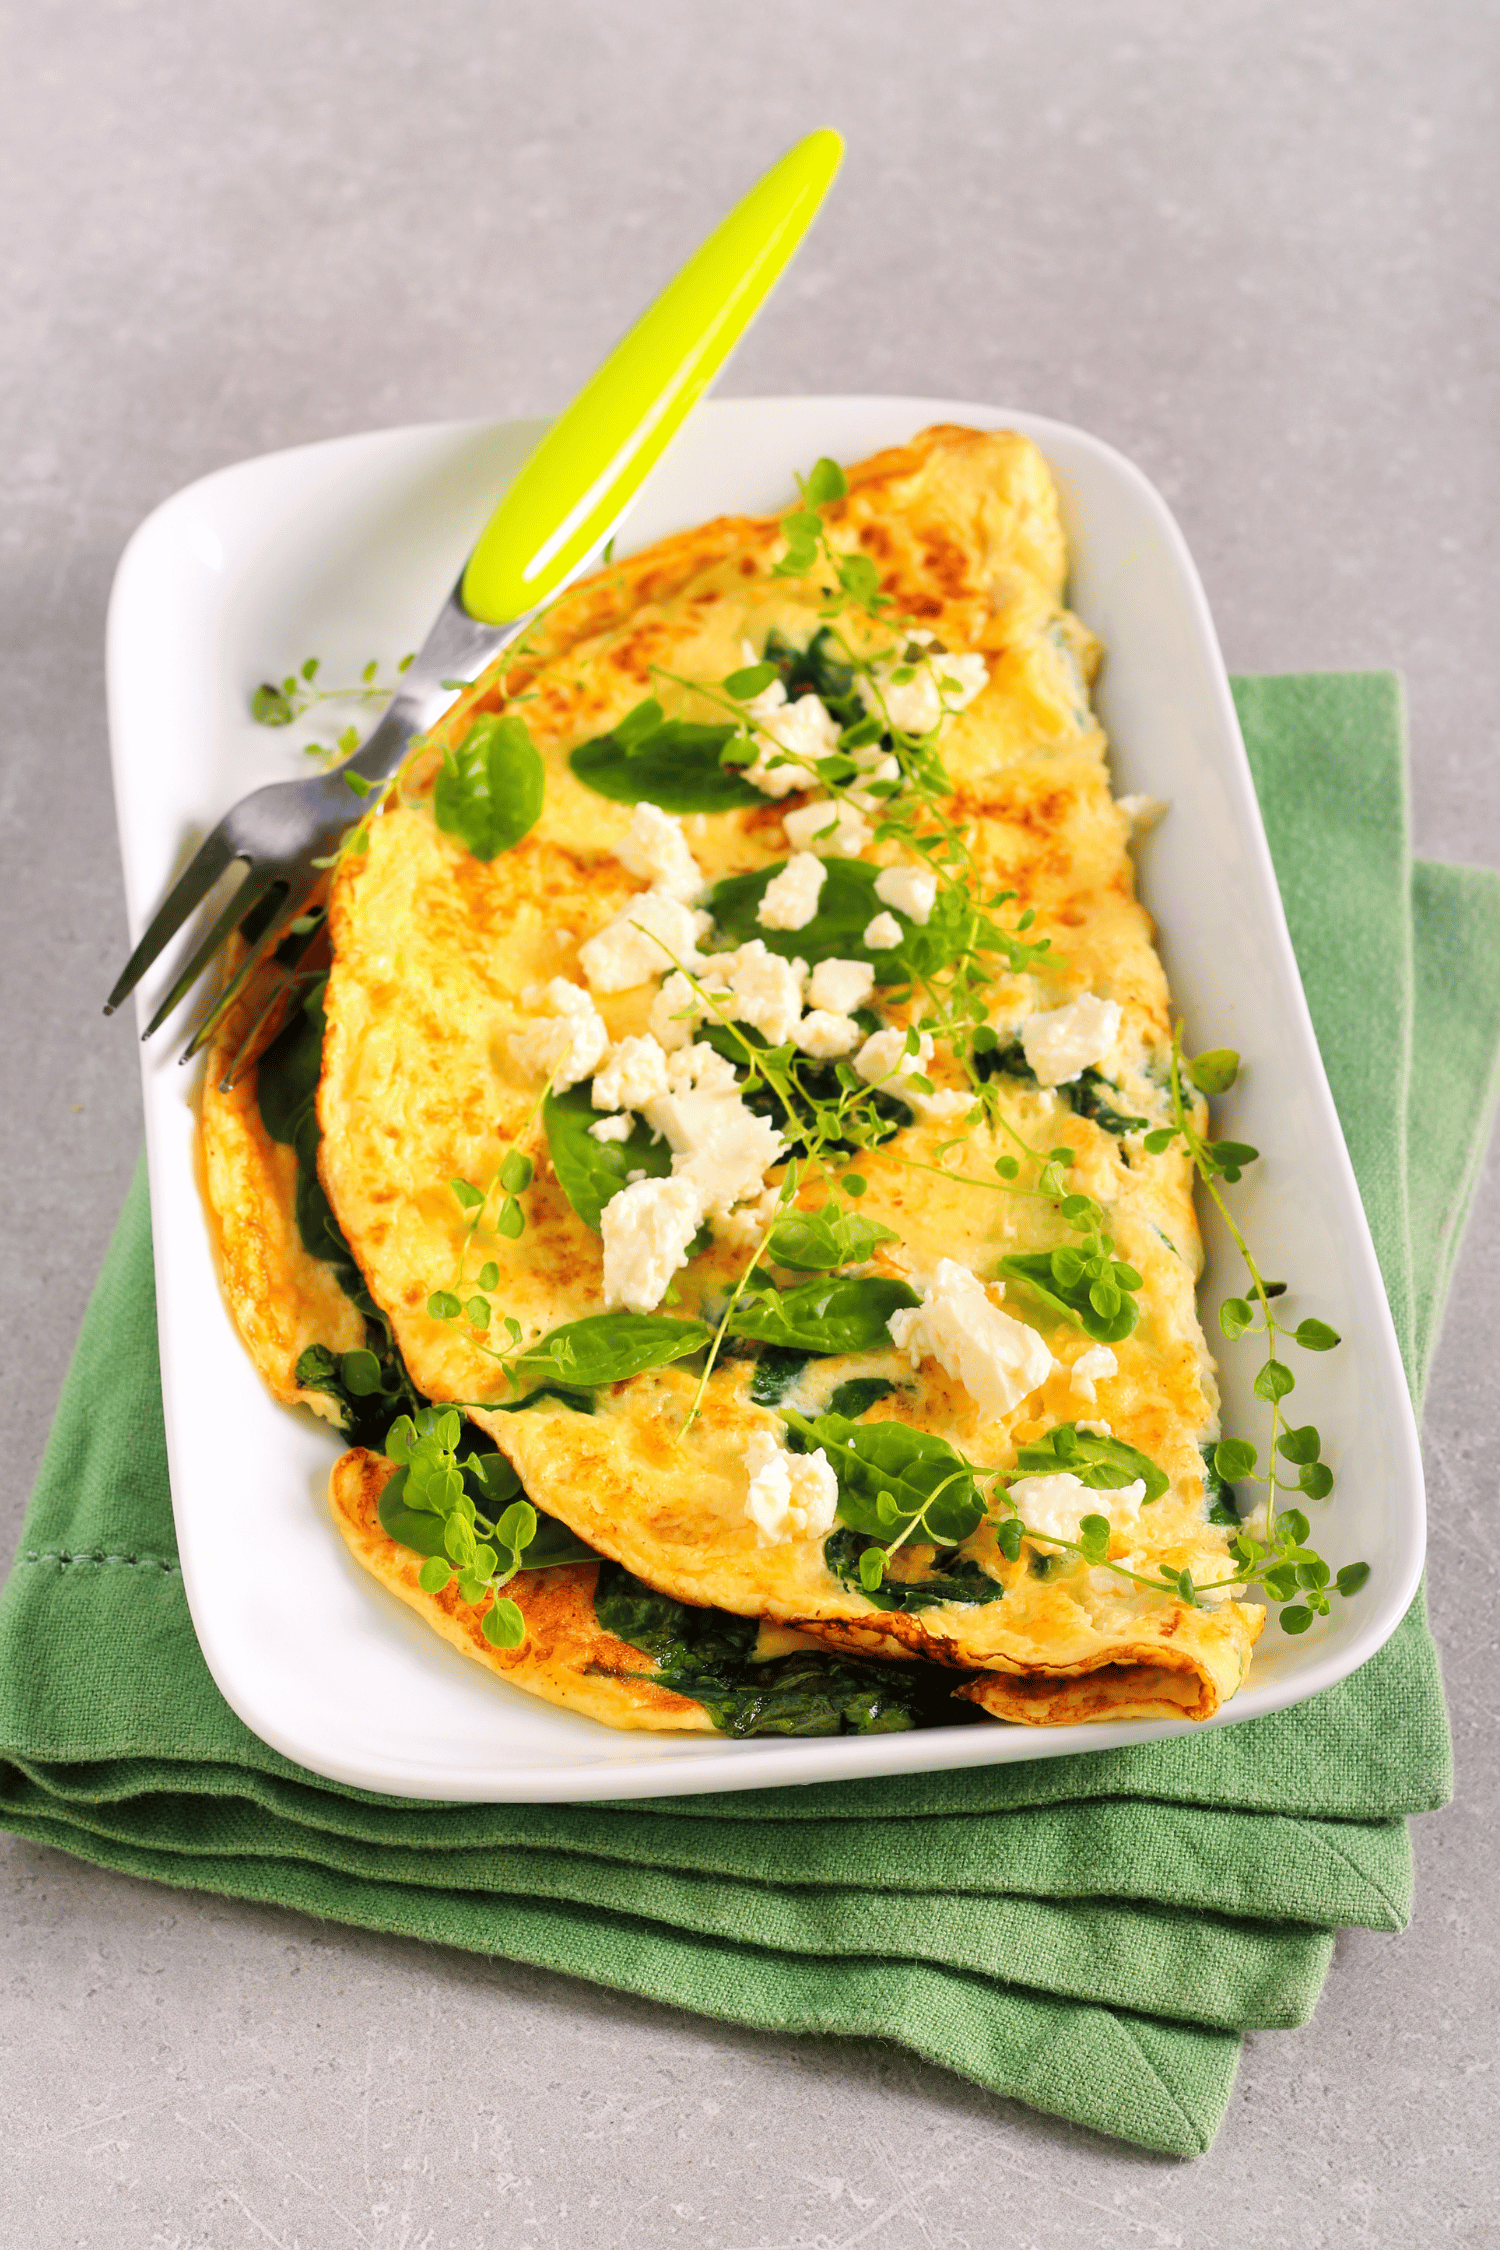 Flavorful Spinach And Feta Omelet Recipe To Kickstart Your Day